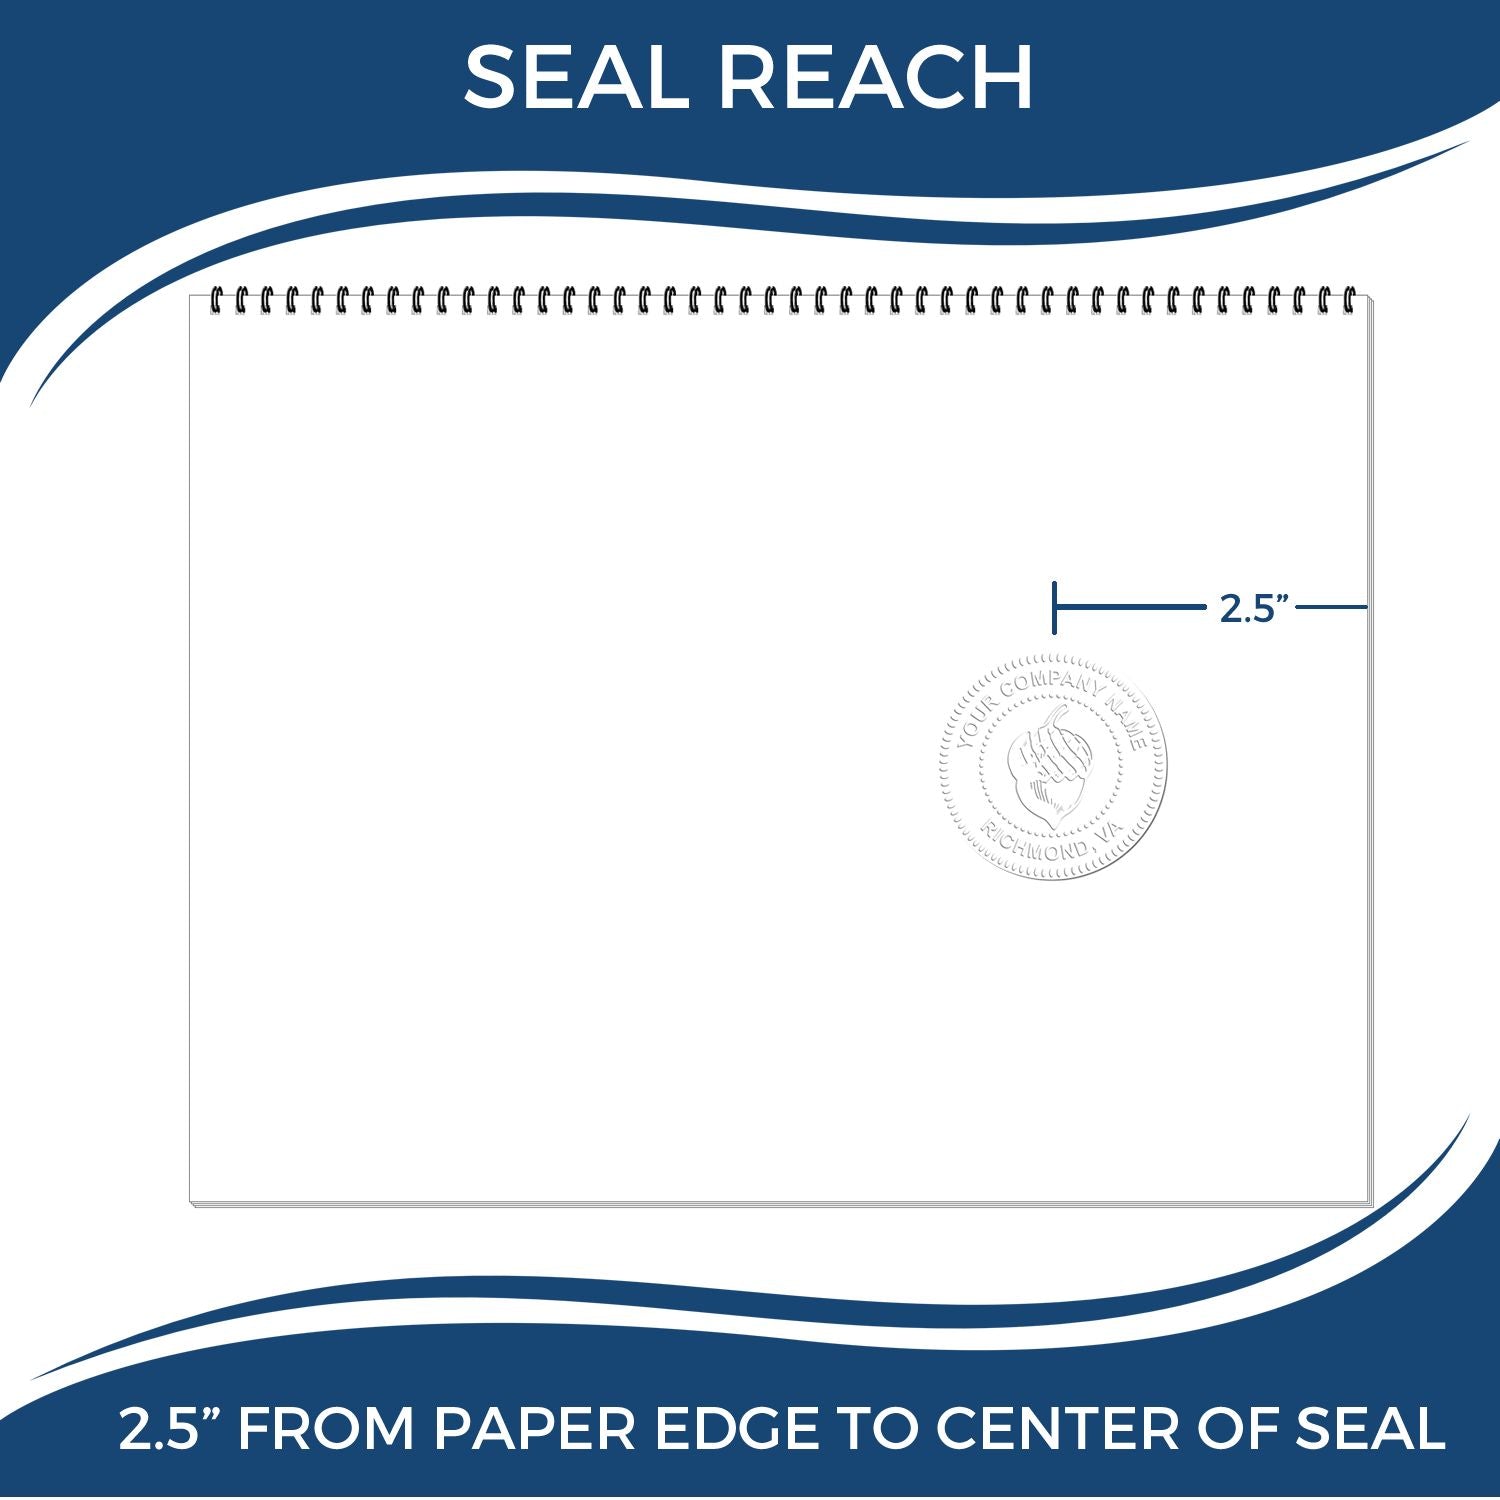 An infographic showing the seal reach which is represented by a ruler and a miniature seal image of the Heavy Duty Cast Iron Wyoming Geologist Seal Embosser